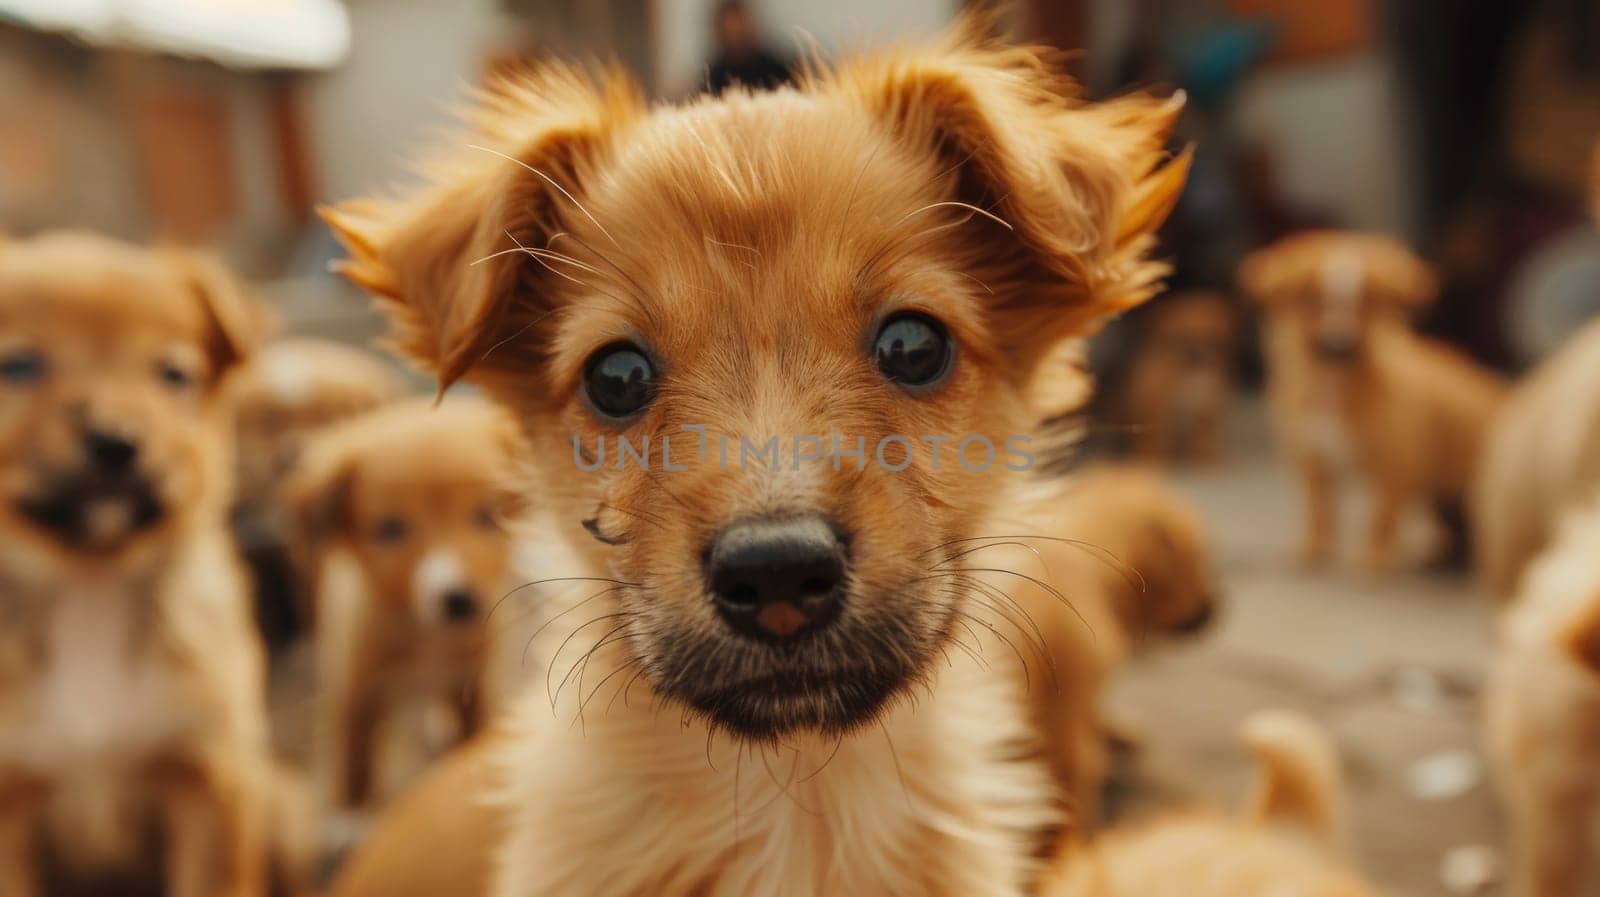 A close up of a brown puppy with big eyes in the middle